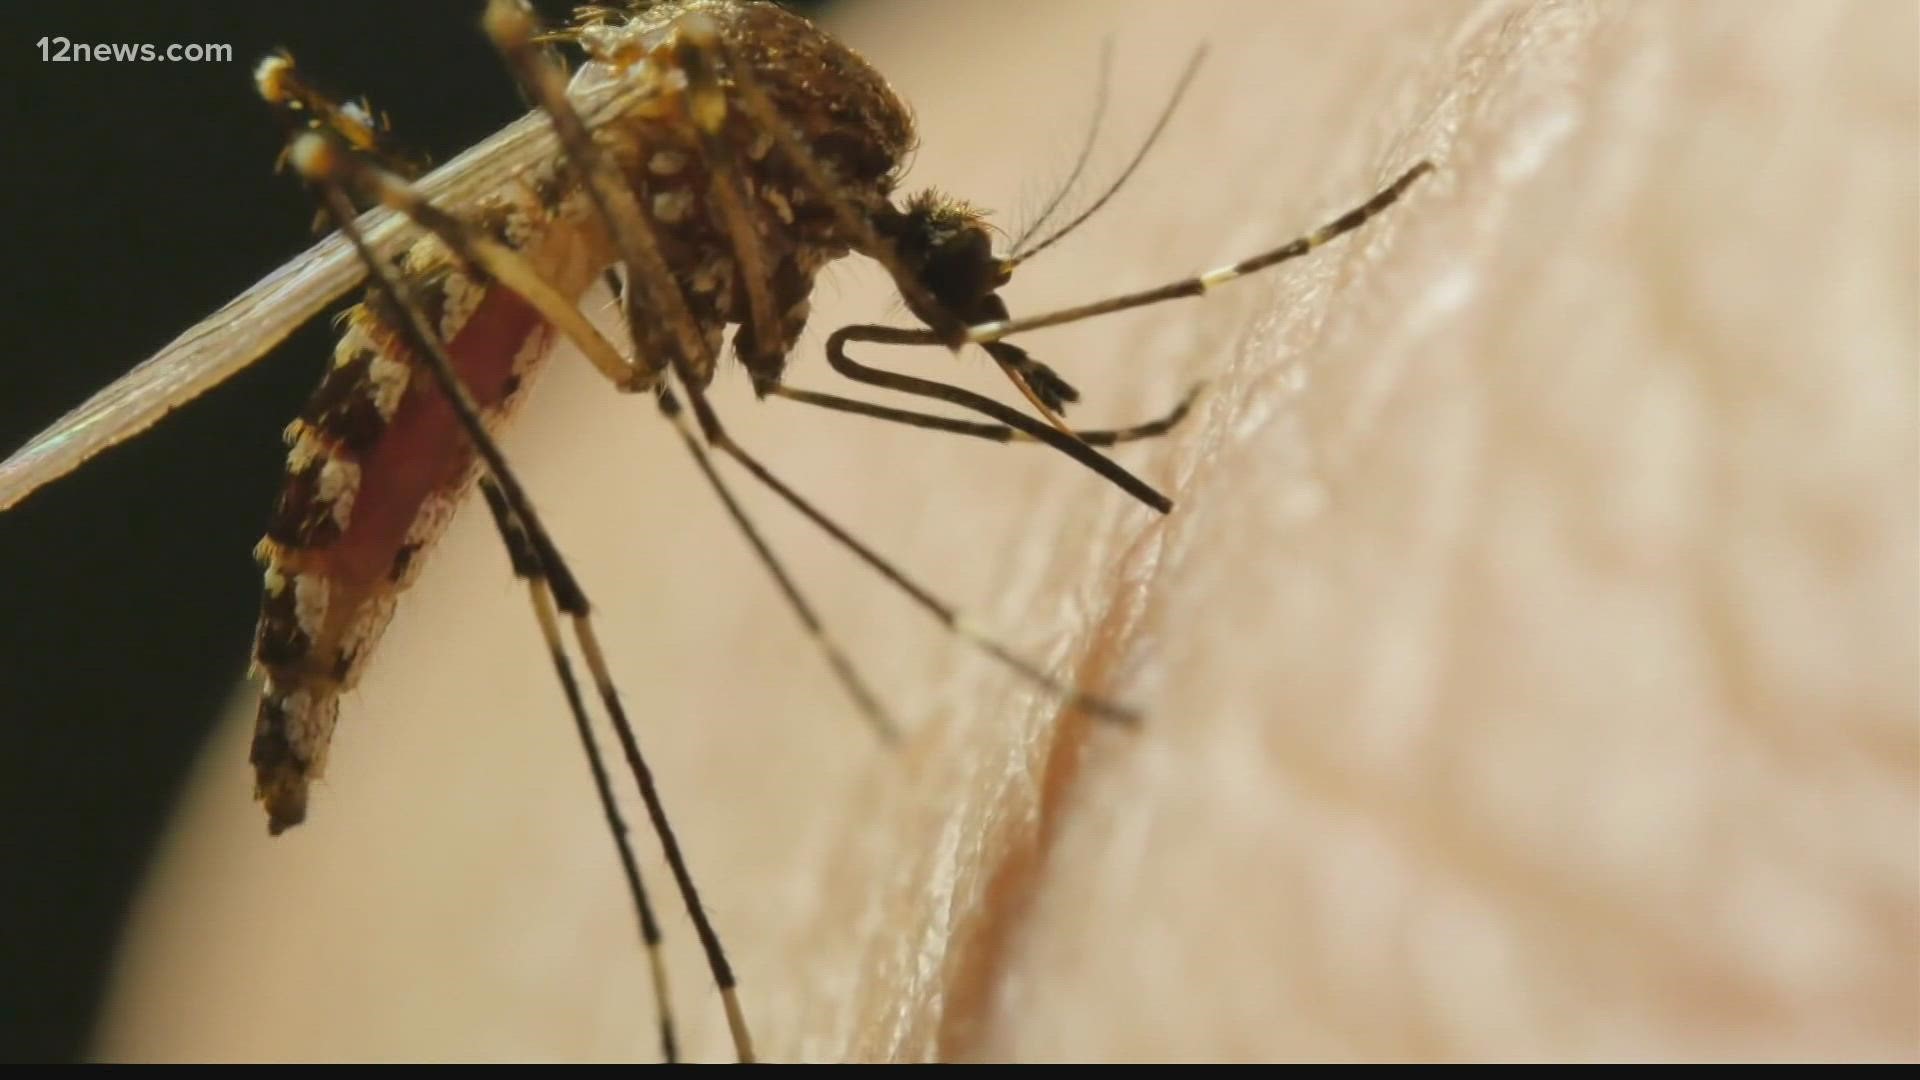 Mosquitos have been dubbed the "world's deadliest animal" by the CDC and they might be in your neighborhood. Here are a few things you can do to avoid being bit.